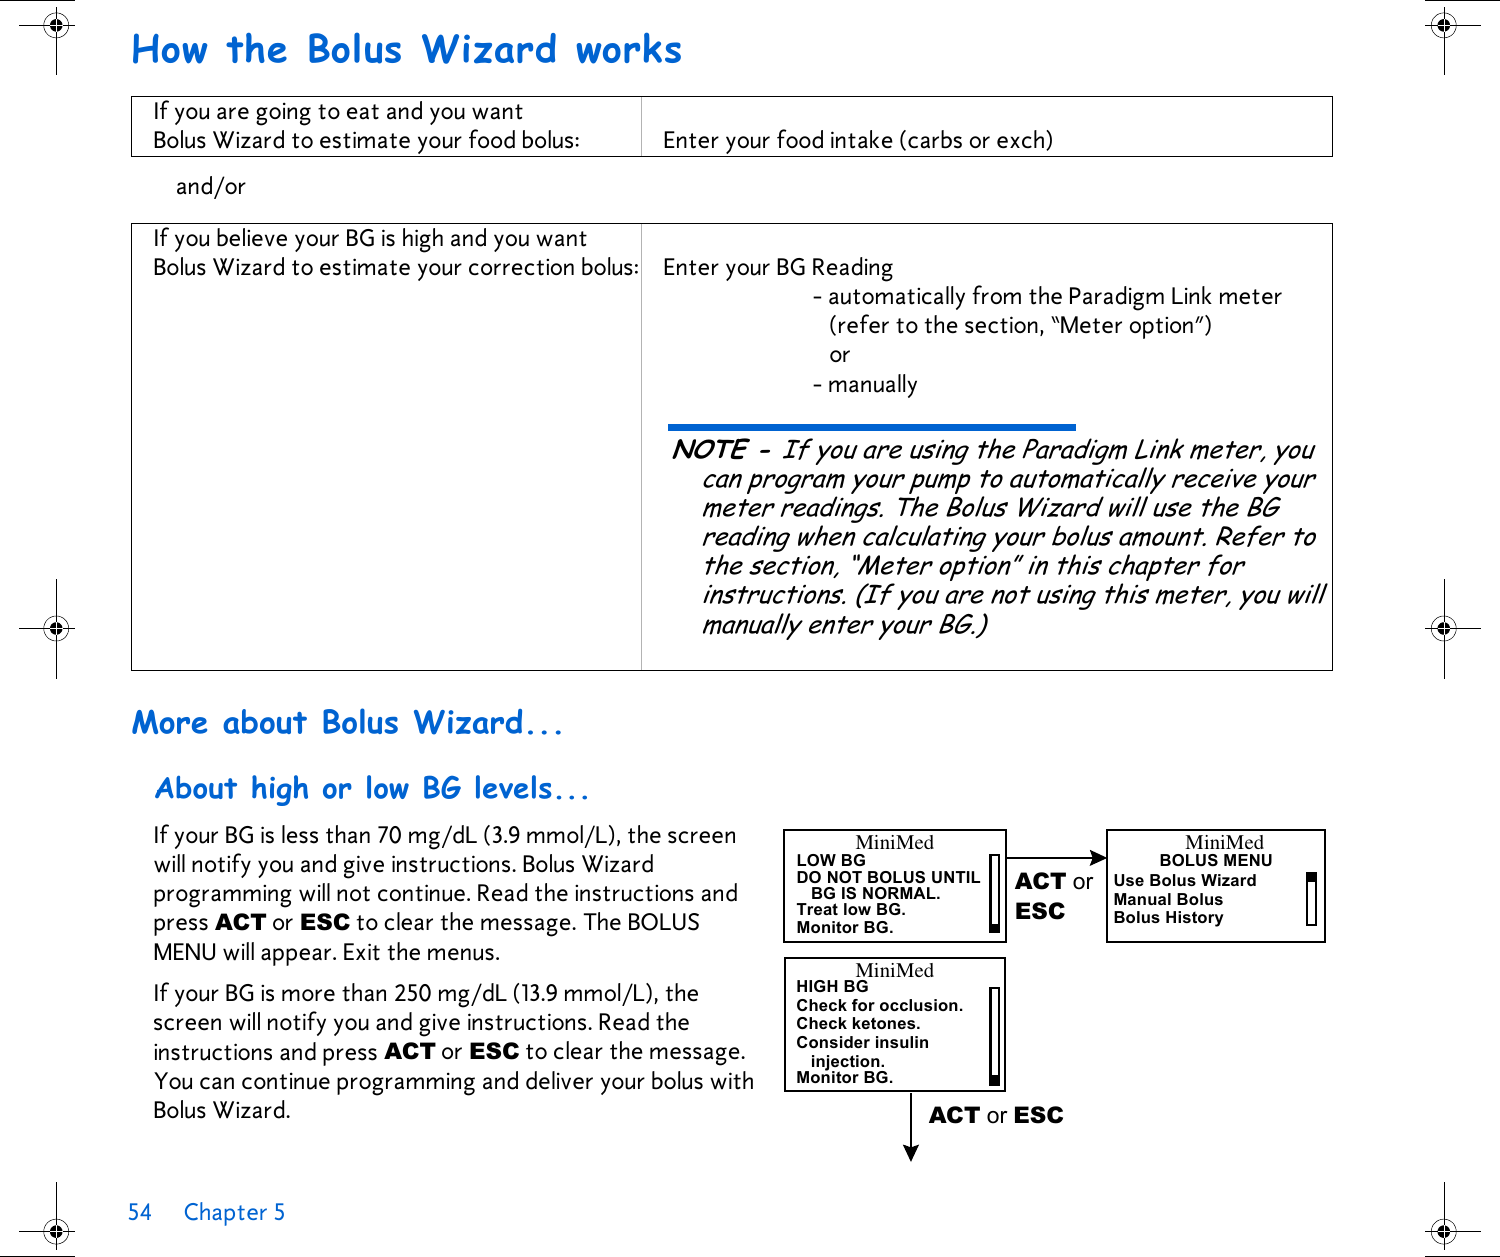 54 Chapter 5 How the Bolus Wizard works More about Bolus Wizard...About high or low BG levels...If your BG is less than 70 mg/dL (3.9 mmol/L), the screen will notify you and give instructions. Bolus Wizard programming will not continue. Read the instructions and press ACT or ESC to clear the message. The BOLUS MENU will appear. Exit the menus. If your BG is more than 250 mg/dL (13.9 mmol/L), the screen will notify you and give instructions. Read the instructions and press ACT or ESC to clear the message. You can continue programming and deliver your bolus with Bolus Wizard. If you are going to eat and you want Bolus Wizard to estimate your food bolus: Enter your food intake (carbs or exch)and/orIf you believe your BG is high and you want Bolus Wizard to estimate your correction bolus: Enter your BG Reading - automatically from the Paradigm Link meter (refer to the section, “Meter option”)or- manuallyNOTE - If you are using the Paradigm Link meter, you can program your pump to automatically receive your meter readings. The Bolus Wizard will use the BG reading when calculating your bolus amount. Refer to the section, “Meter option” in this chapter for instructions. (If you are not using this meter, you will manually enter your BG.)MiniMedLOW BG DO NOT BOLUS UNTILBG IS NORMAL.Treat low BG.Monitor BG.ACT or ESCMiniMedBOLUS MENUMiniMedHIGH BGCheck for occlusion.Check ketones.Consider insulininjection.Monitor BG.ACT or ESCUse Bolus WizardManual BolusBolus History